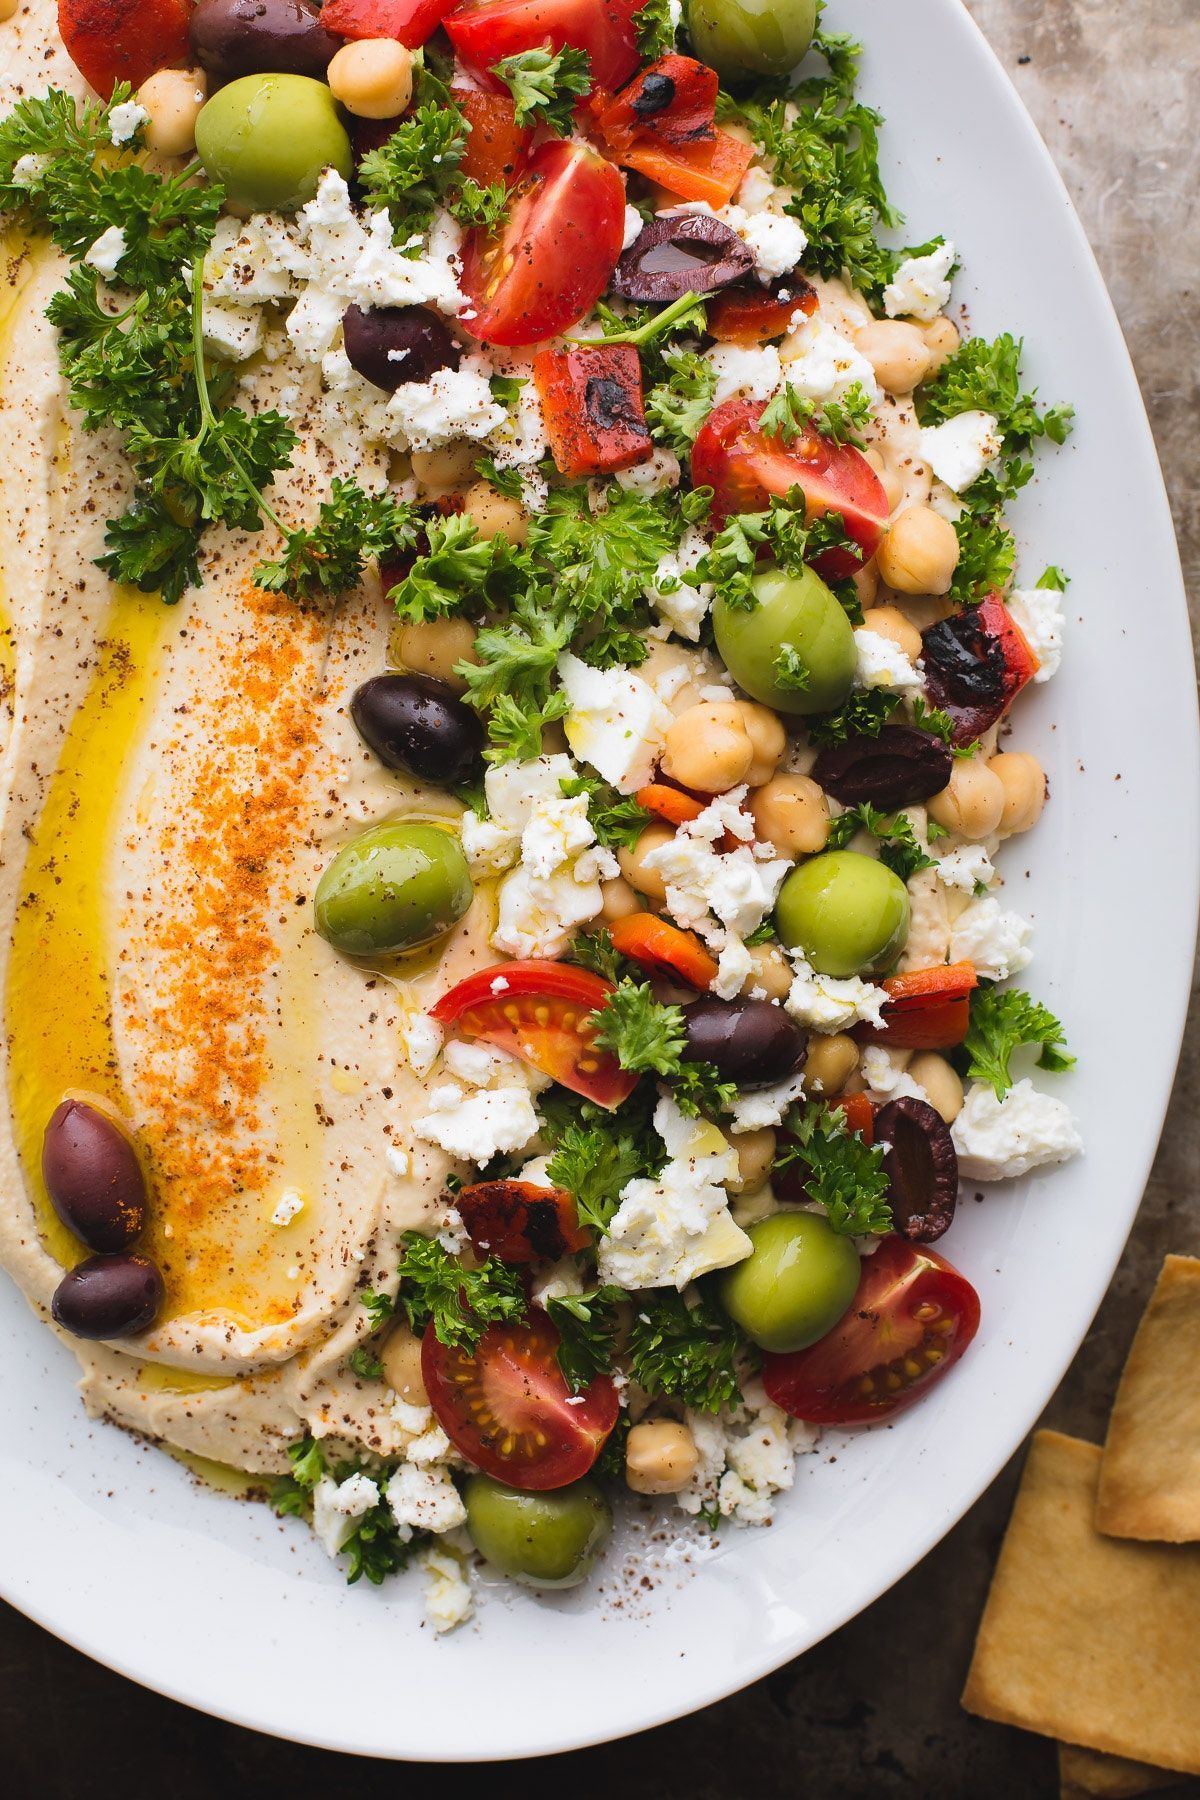 Loaded Hummus Is the Dreamiest Appetizer for Summer Parties -   23 vegetarian recipes appetizers
 ideas